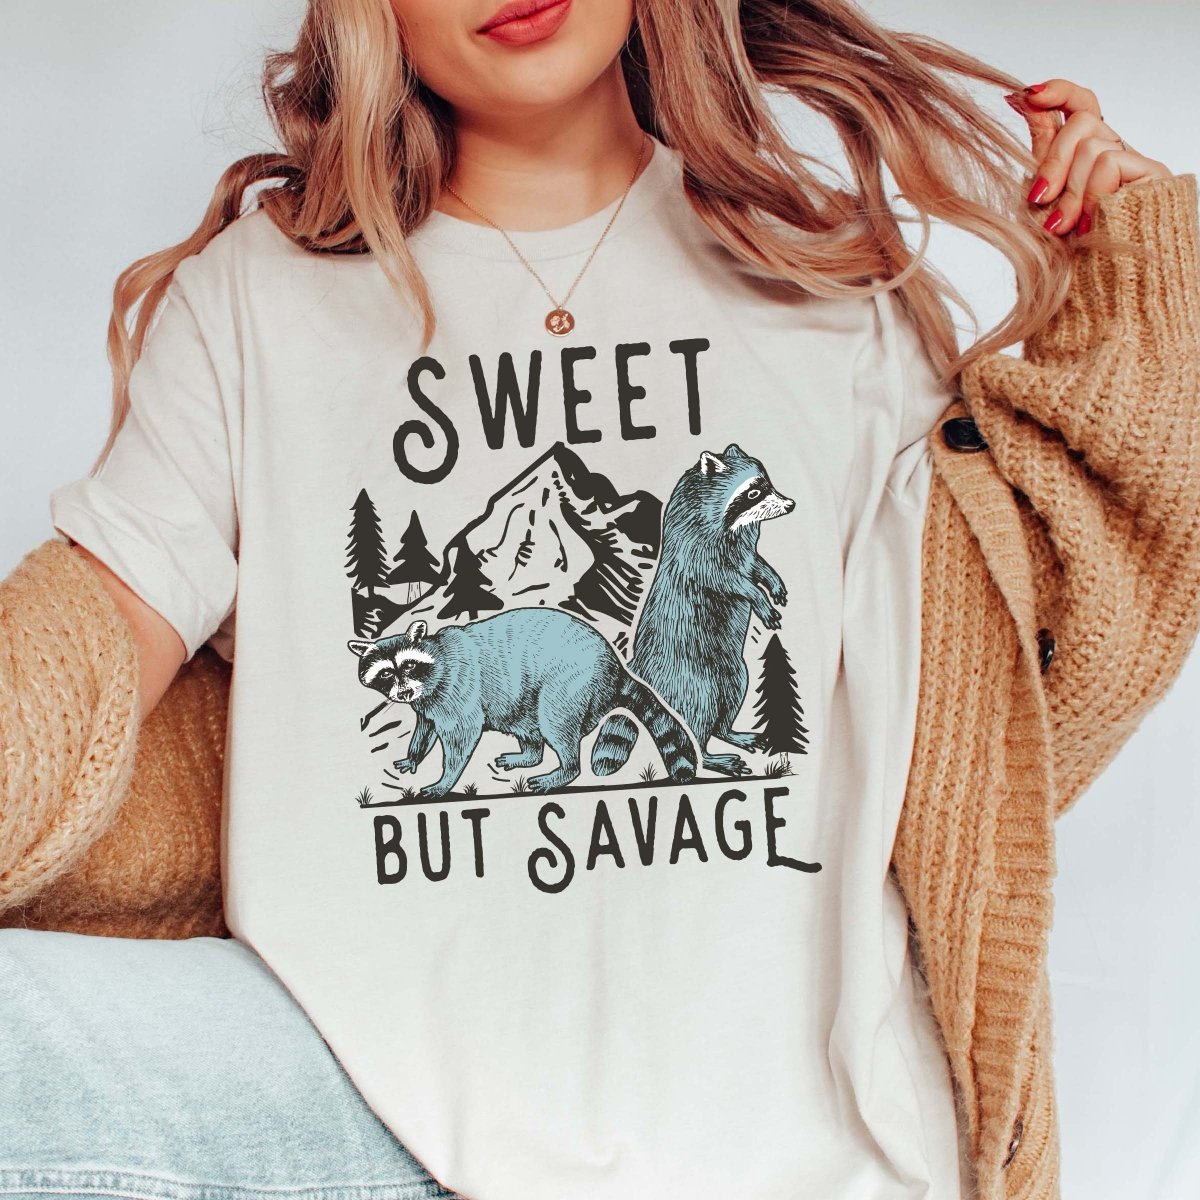 Sweet but savage wholesale Tee - Limeberry Designs